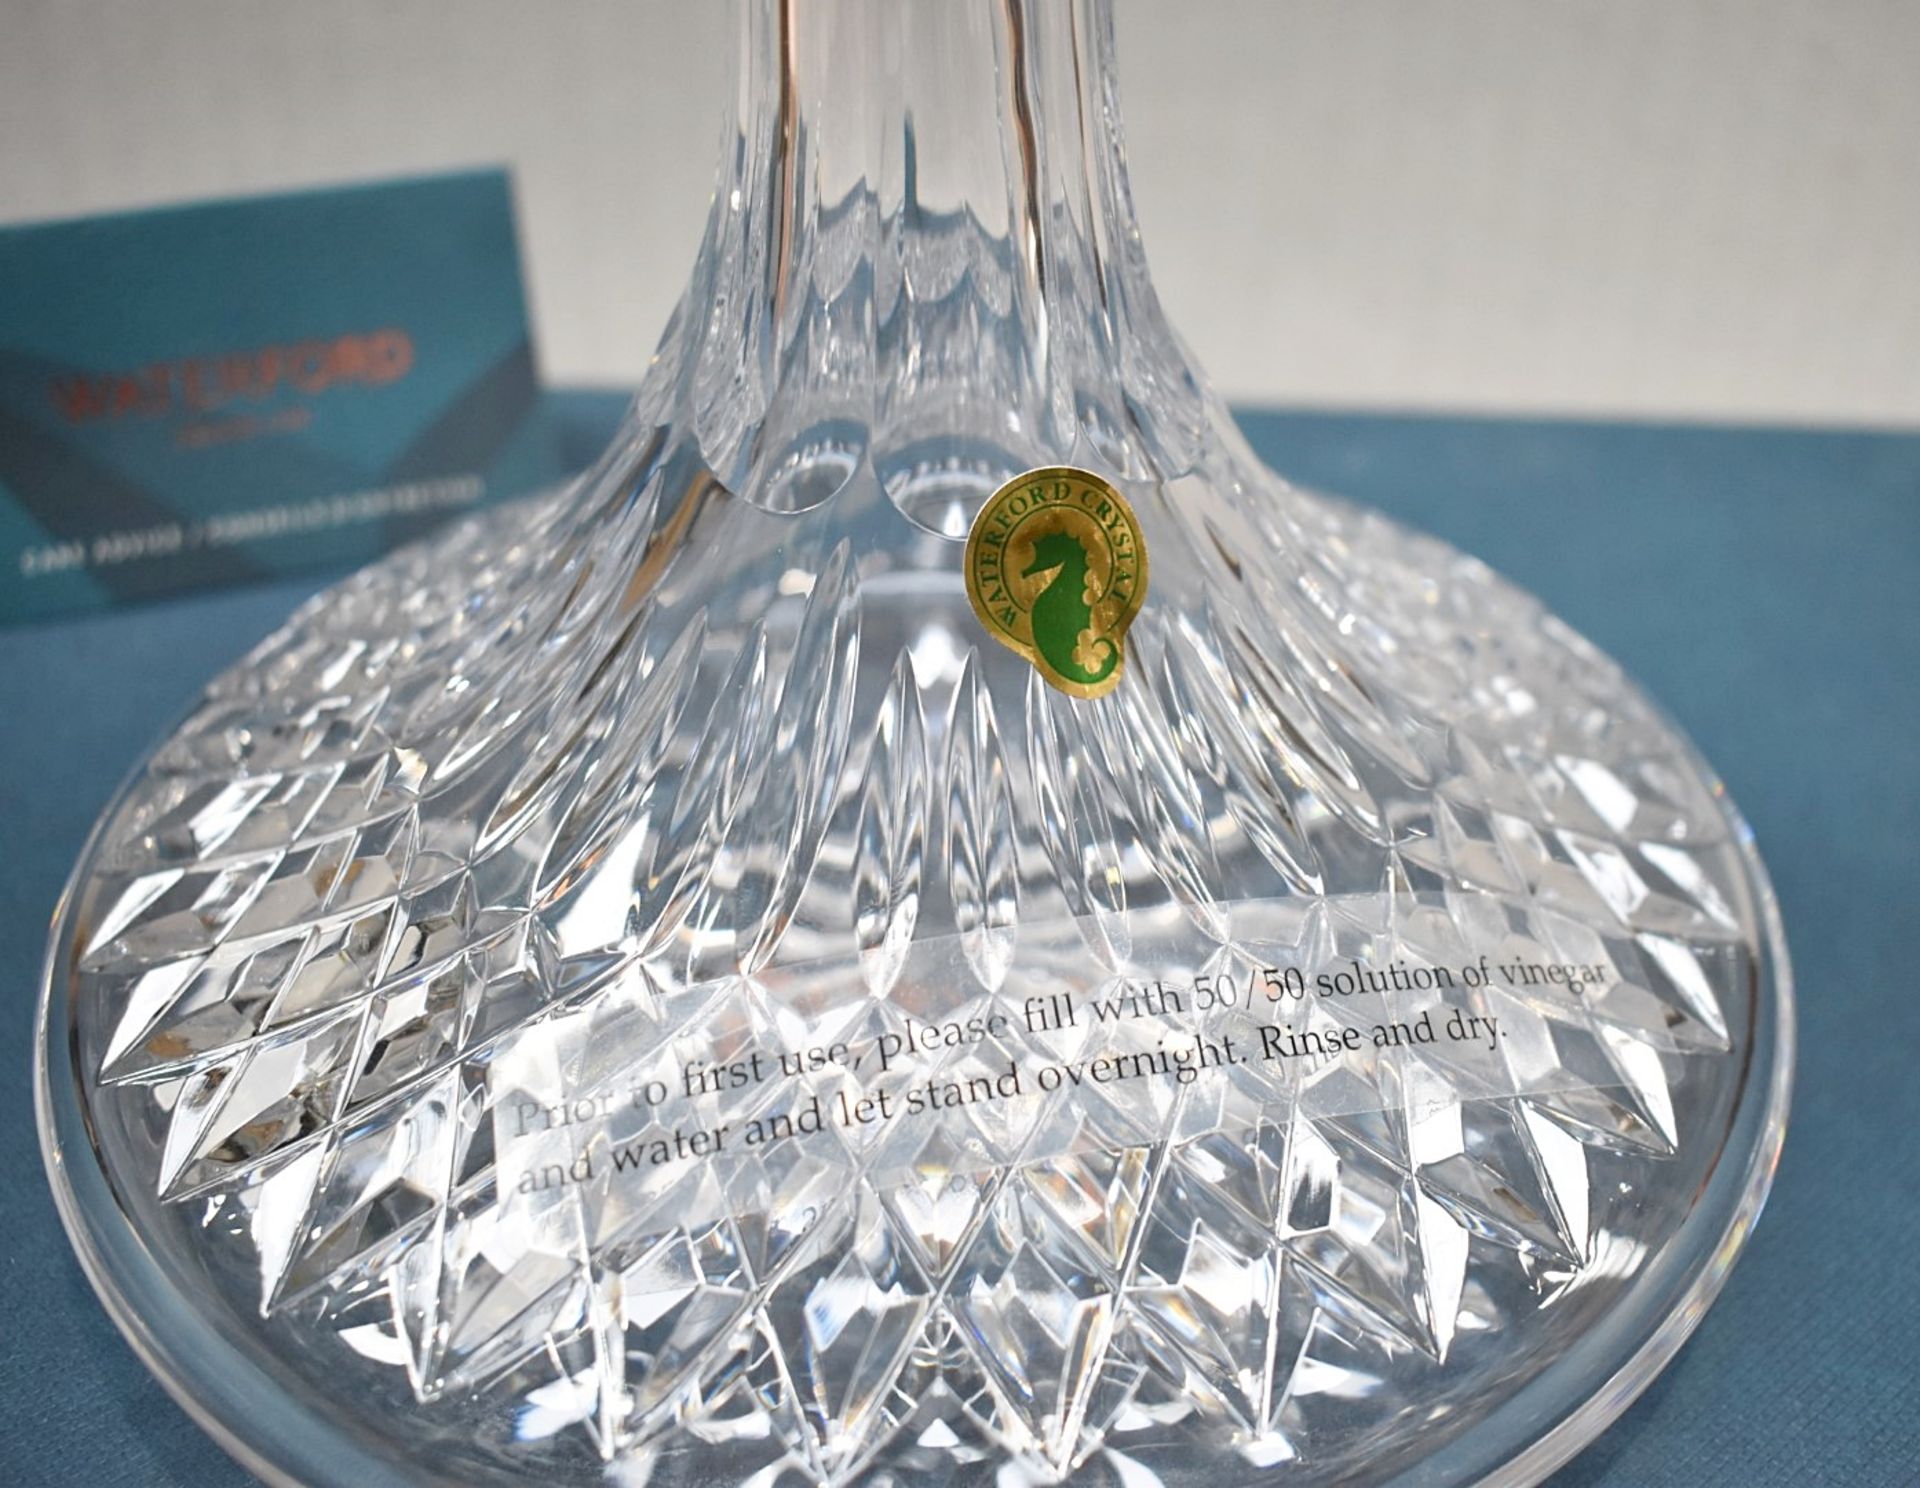 1 x WATERFORD 'Lismore' Lead Crystal Ships Decanter (850ml) - Original Price £450.00 - Boxed - Image 6 of 9